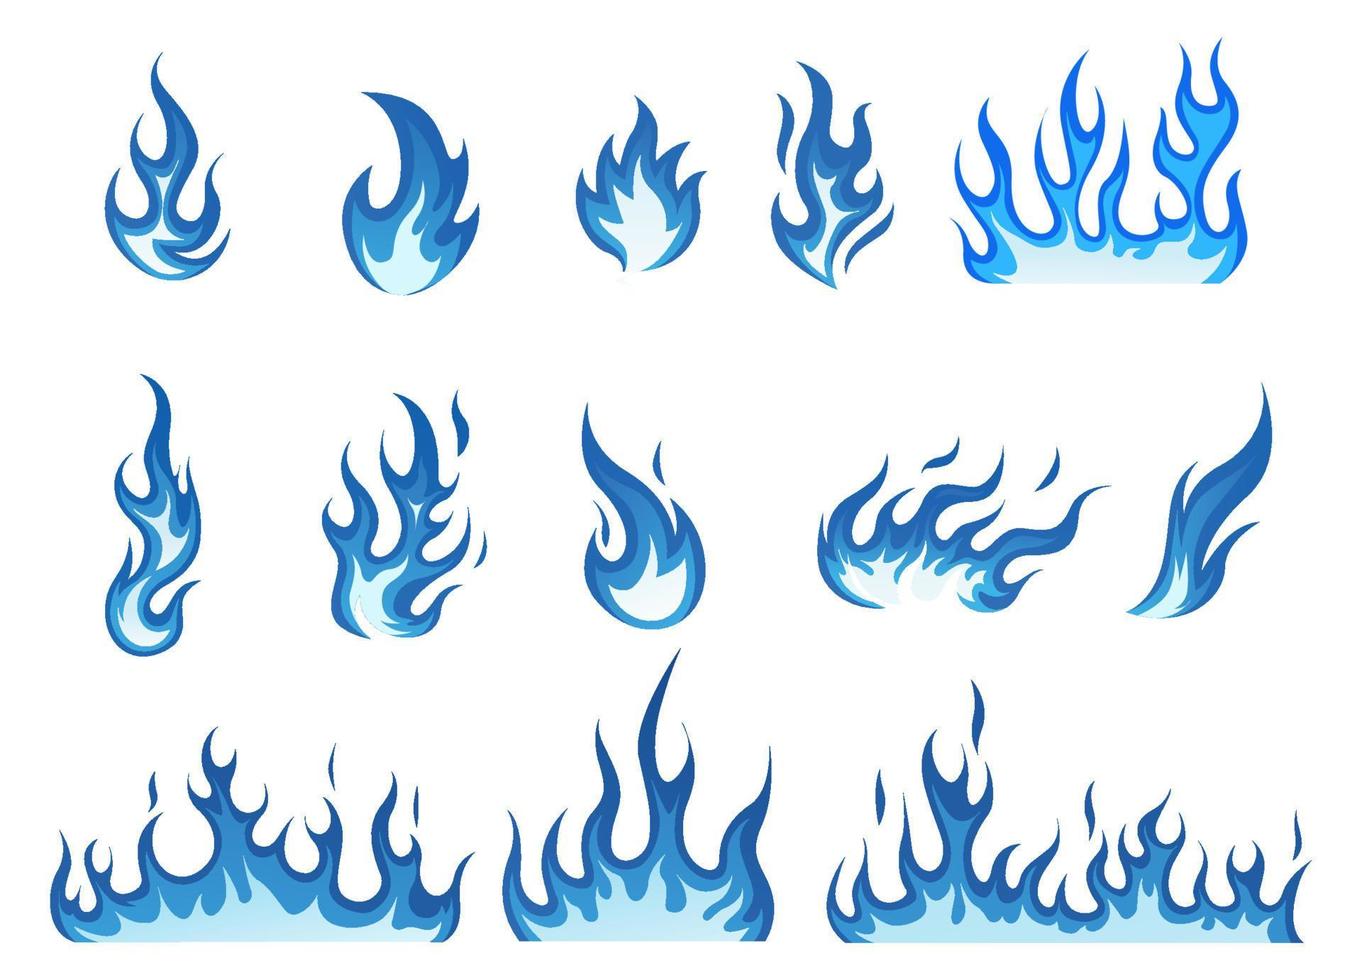 Set of blue flames vector illustration element, background, frame, effects, layout. Vector eps 10. Cartoon of flames.